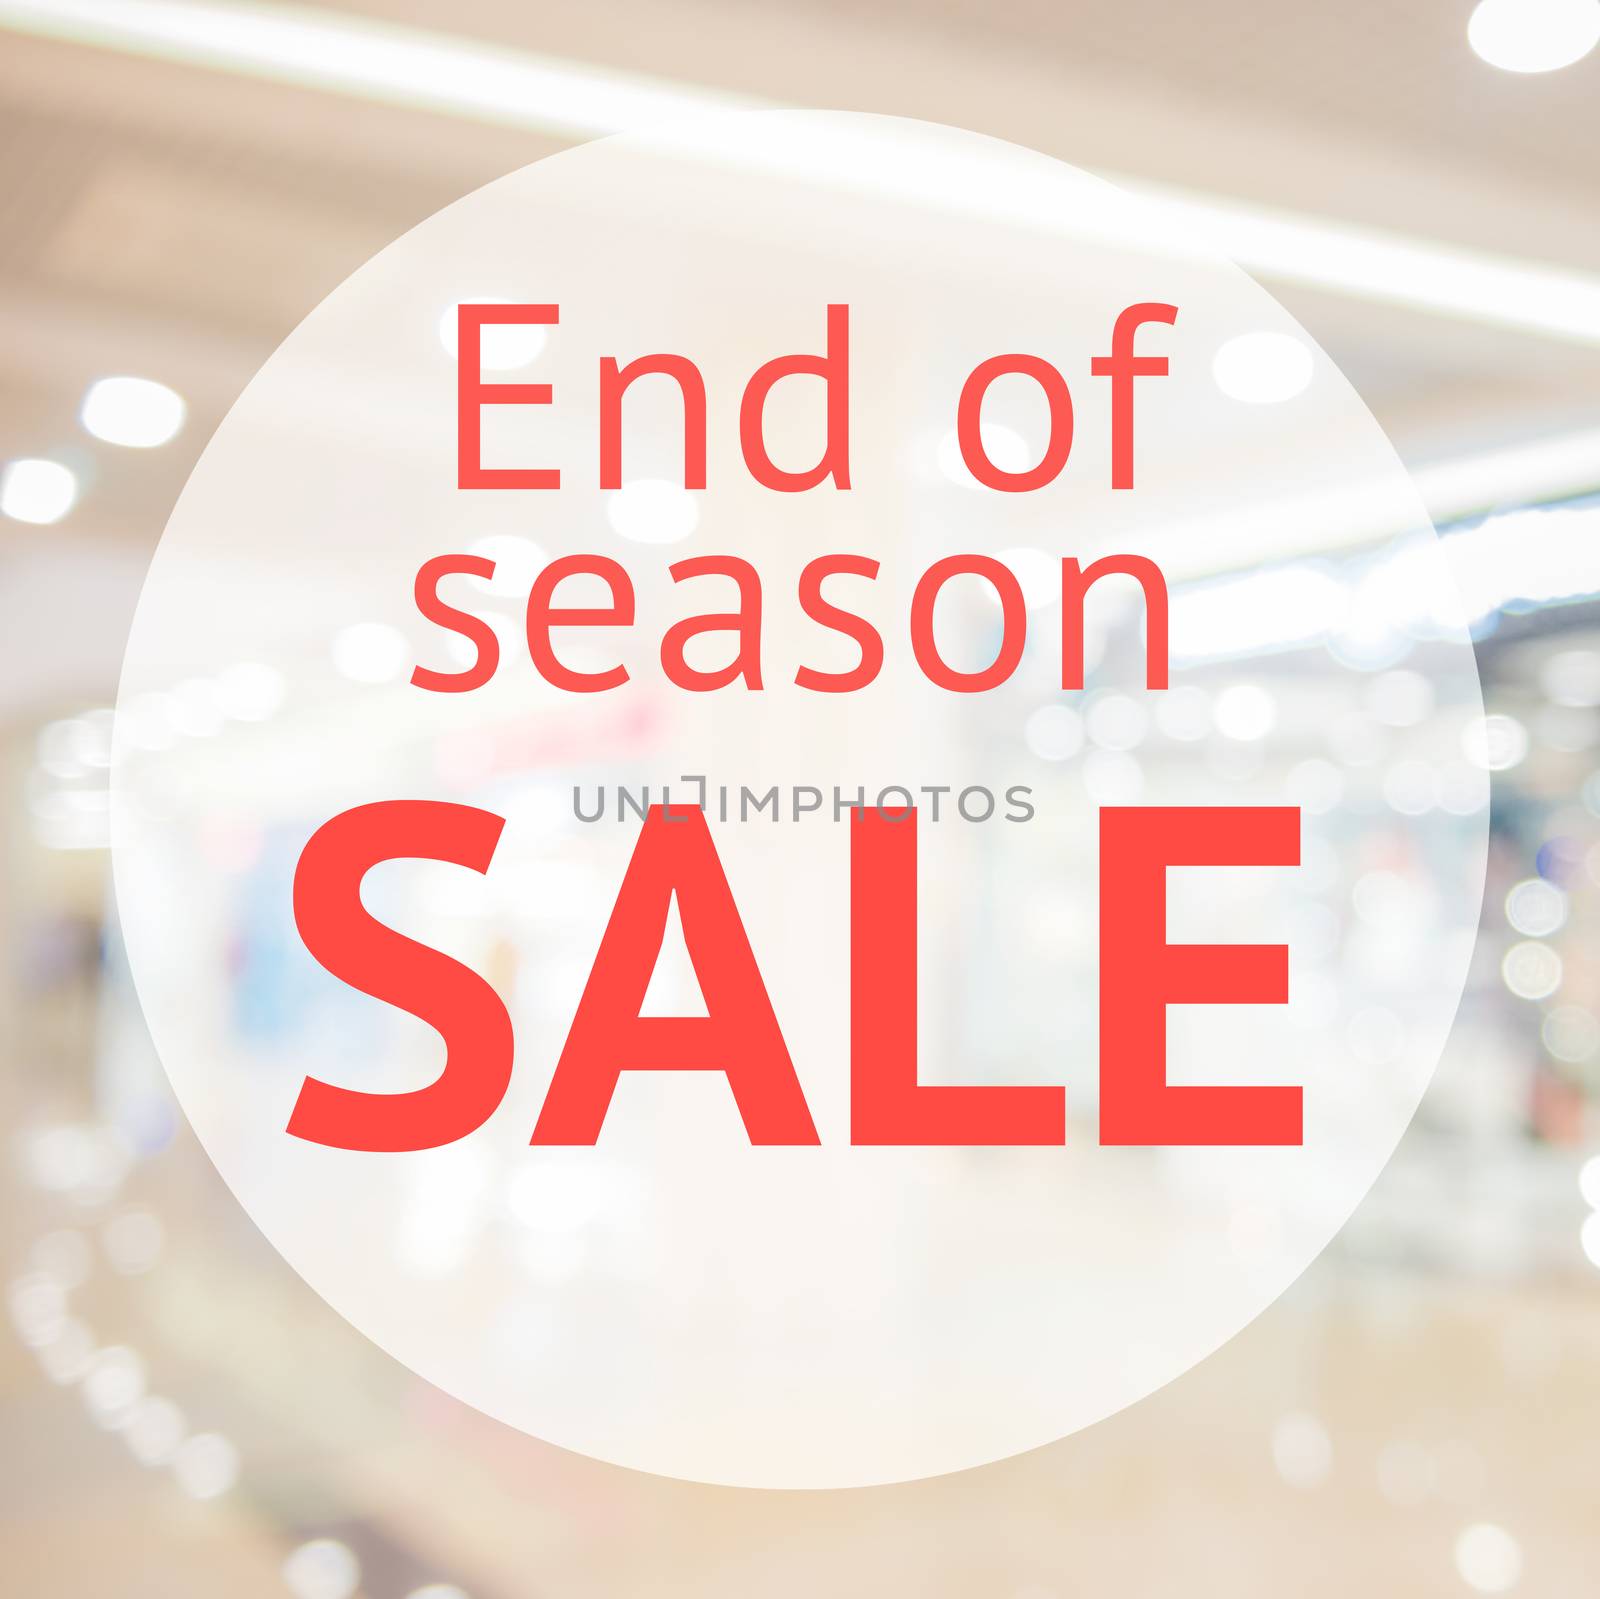 End of season sale sign over blurred store background. Design for shop and sale banners